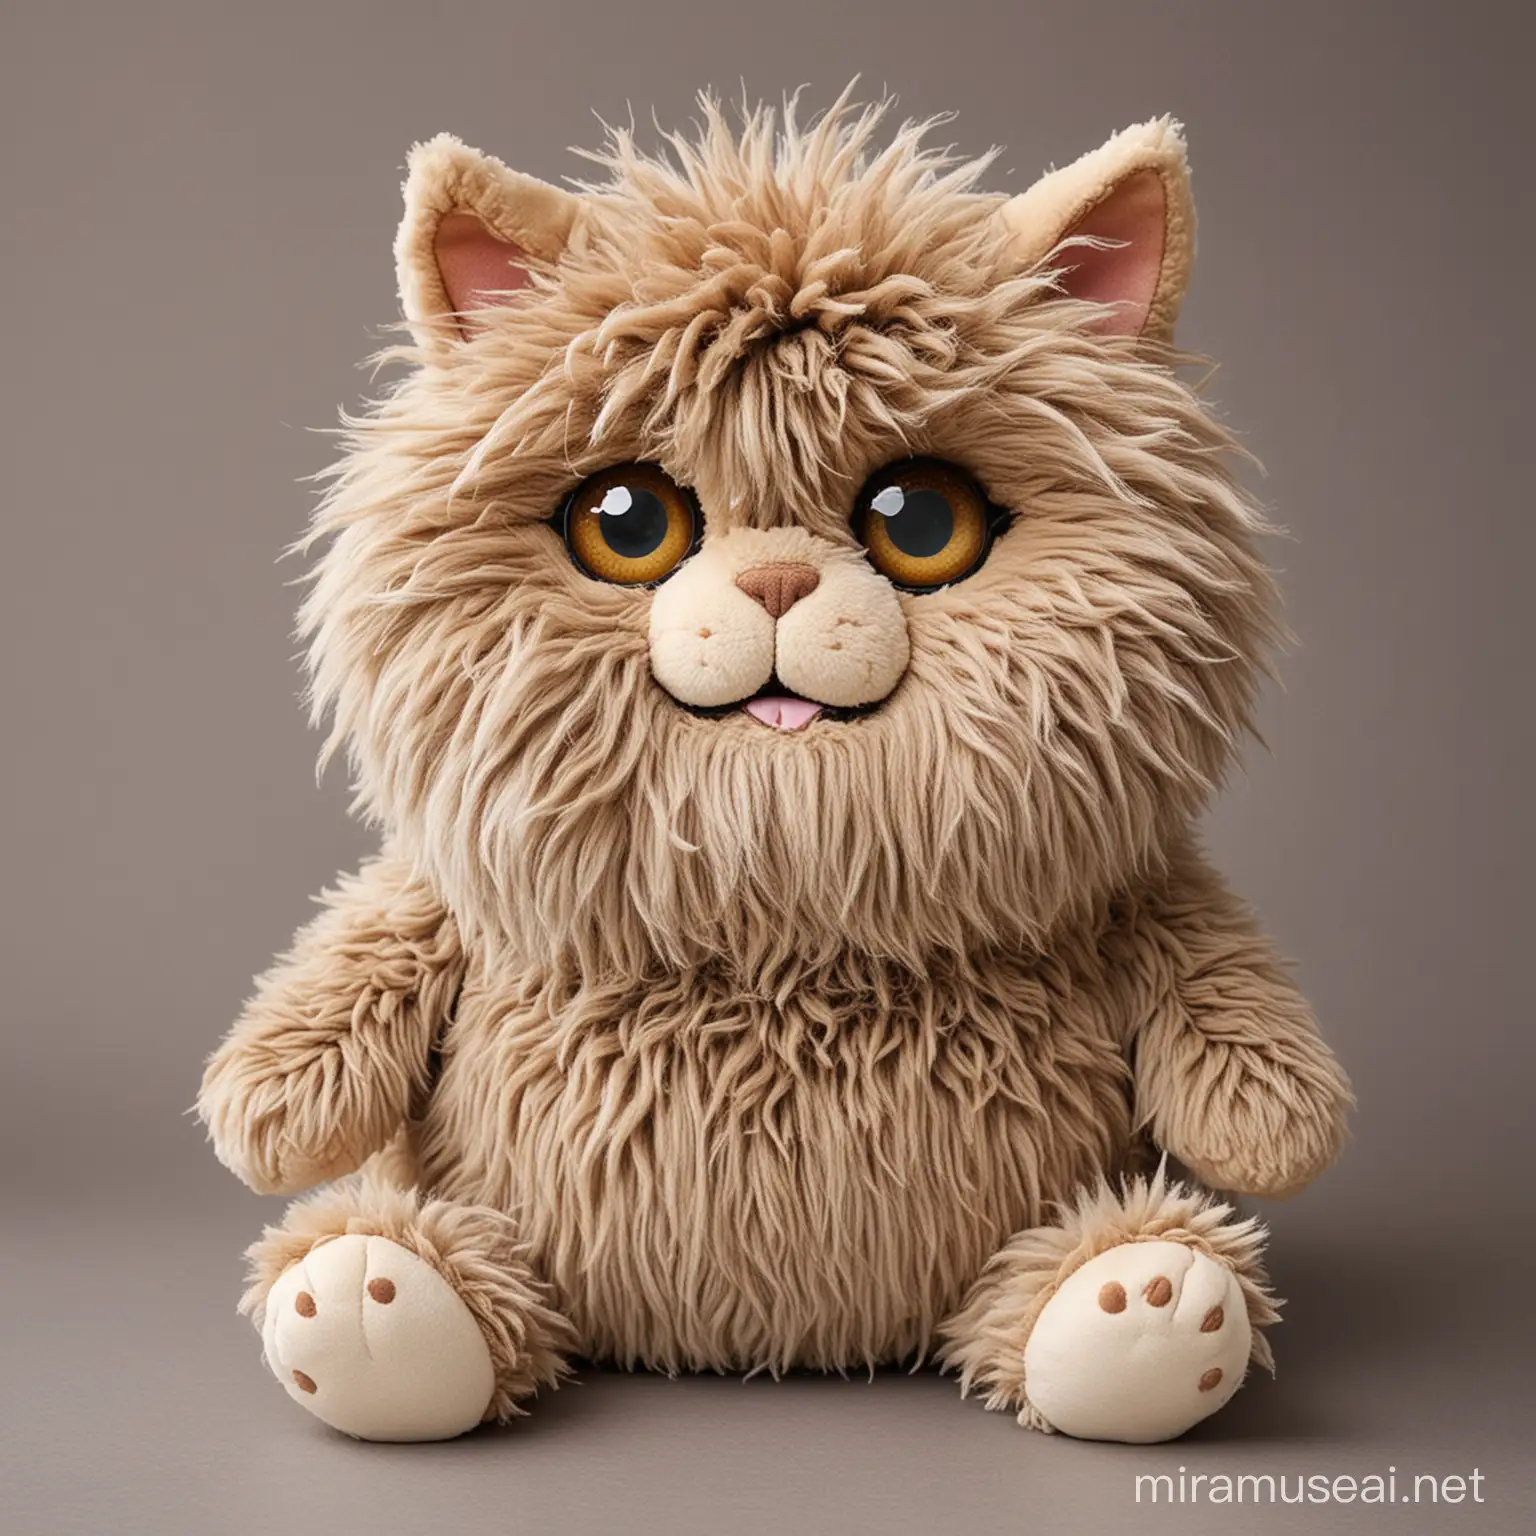 Adorable Plush Toy Fluffy Fat Cat with Big Eyes